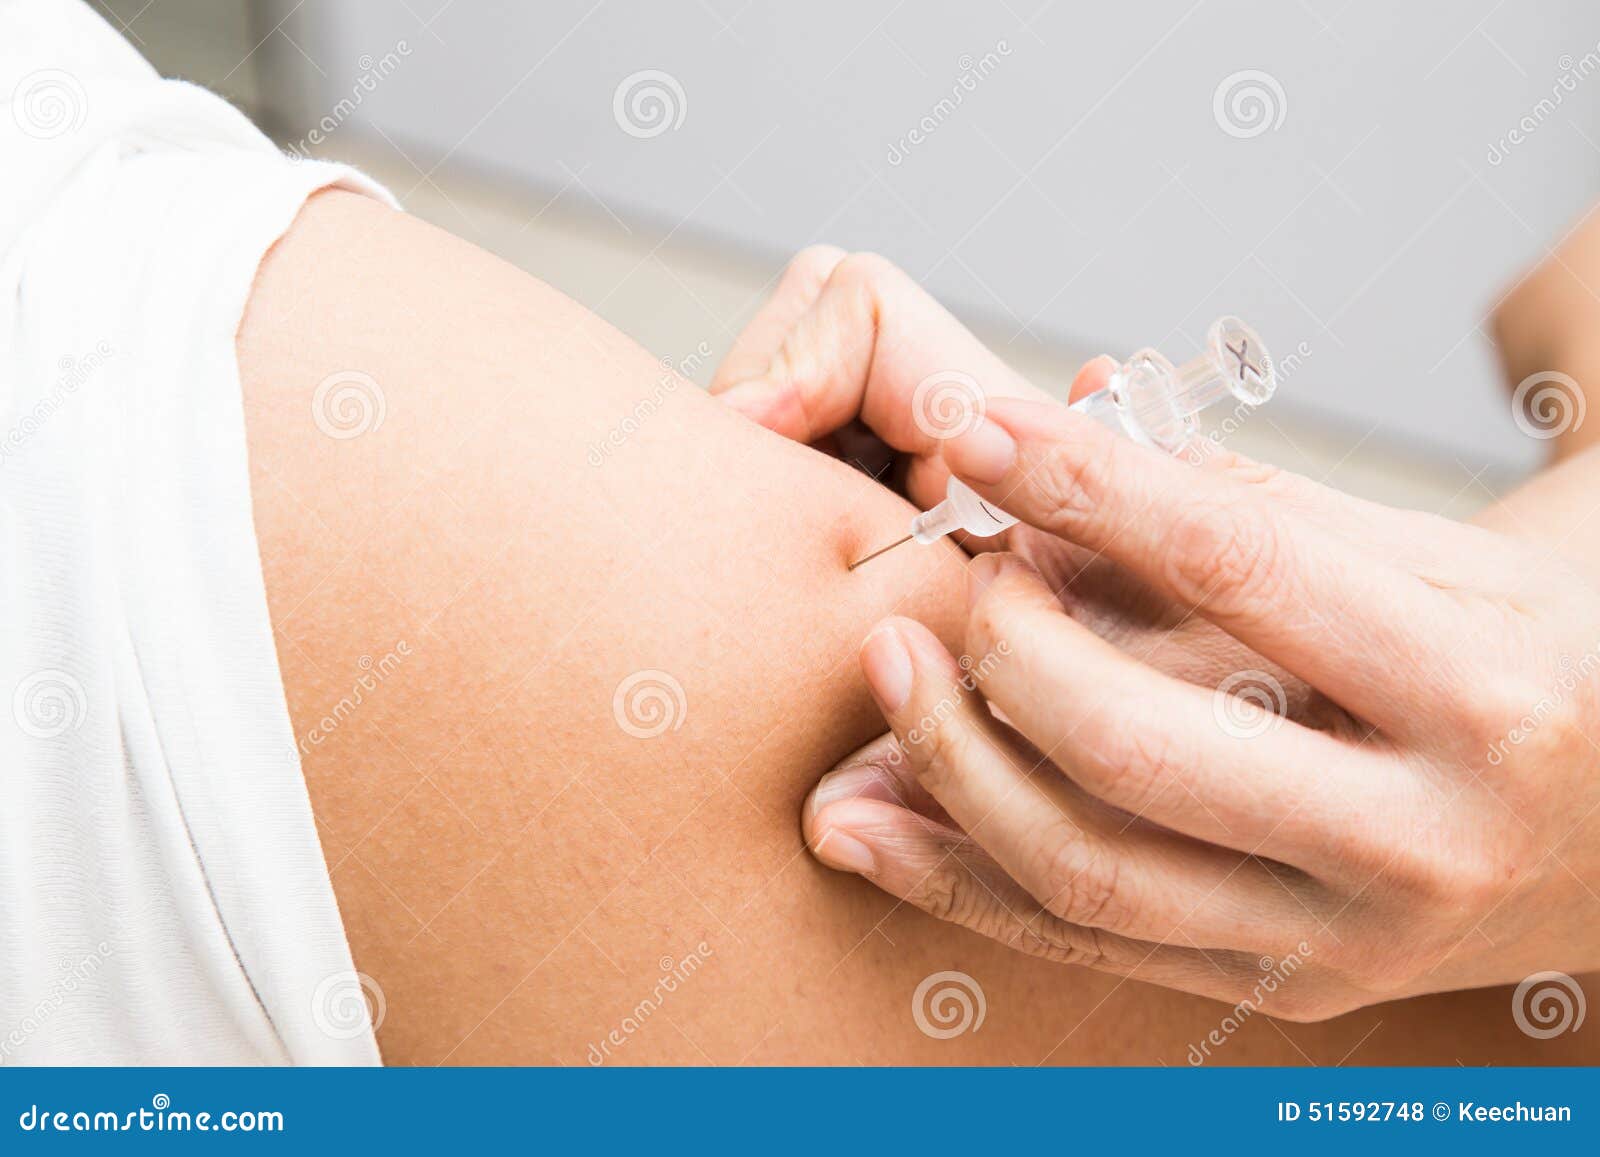 medical doctor preparing to inject vaccine into the arm of a patient